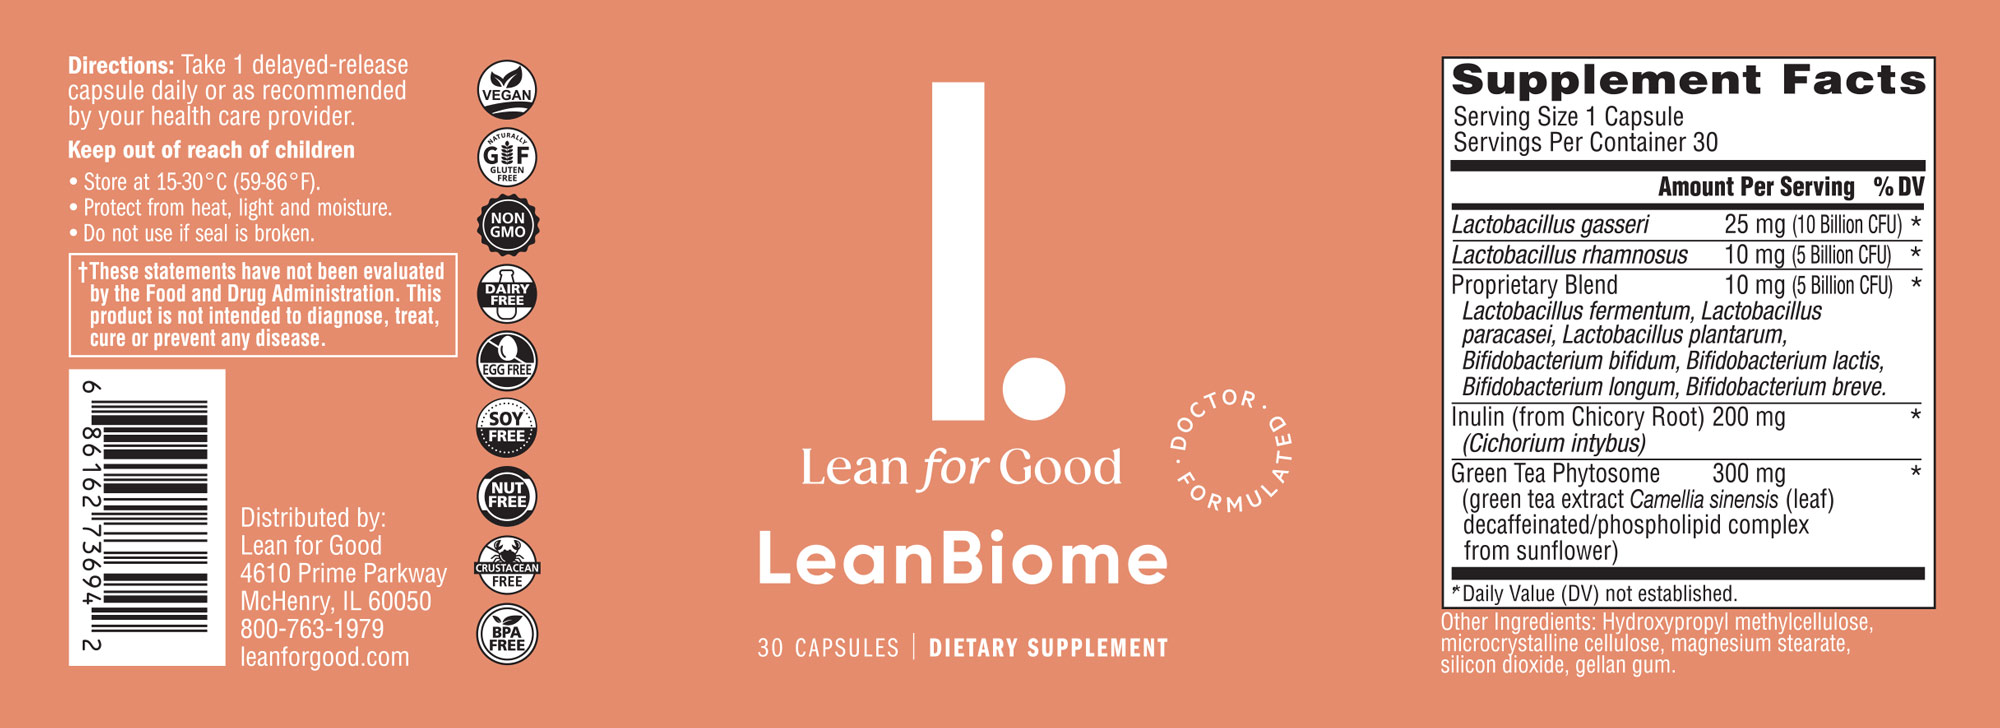 LeanBiome Supplements  Facts